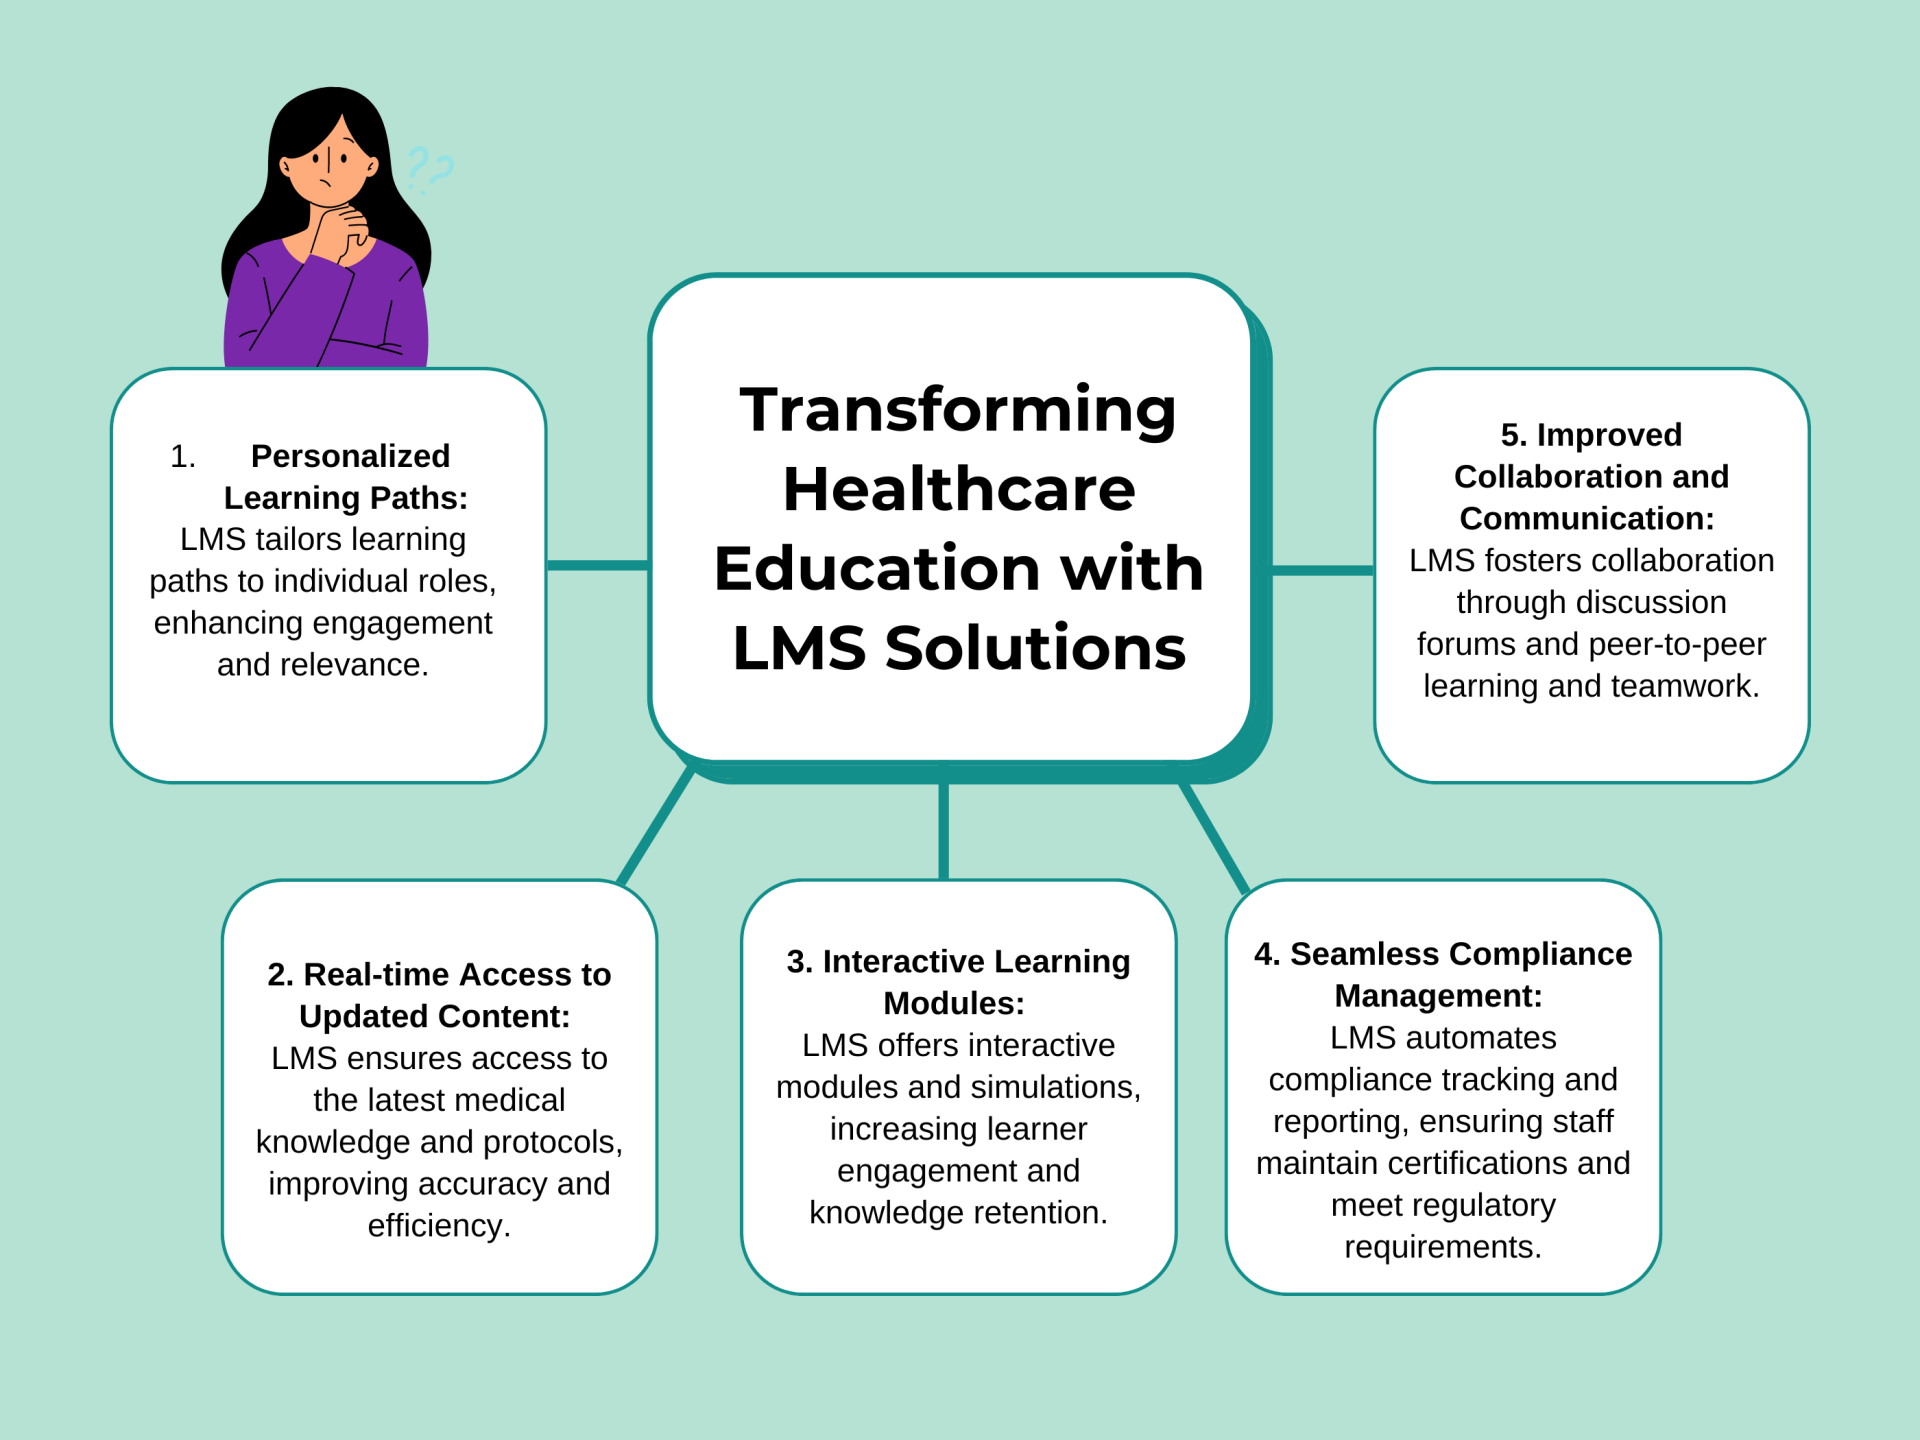 Transforming Healthcare Education with LMS Solutions (1)